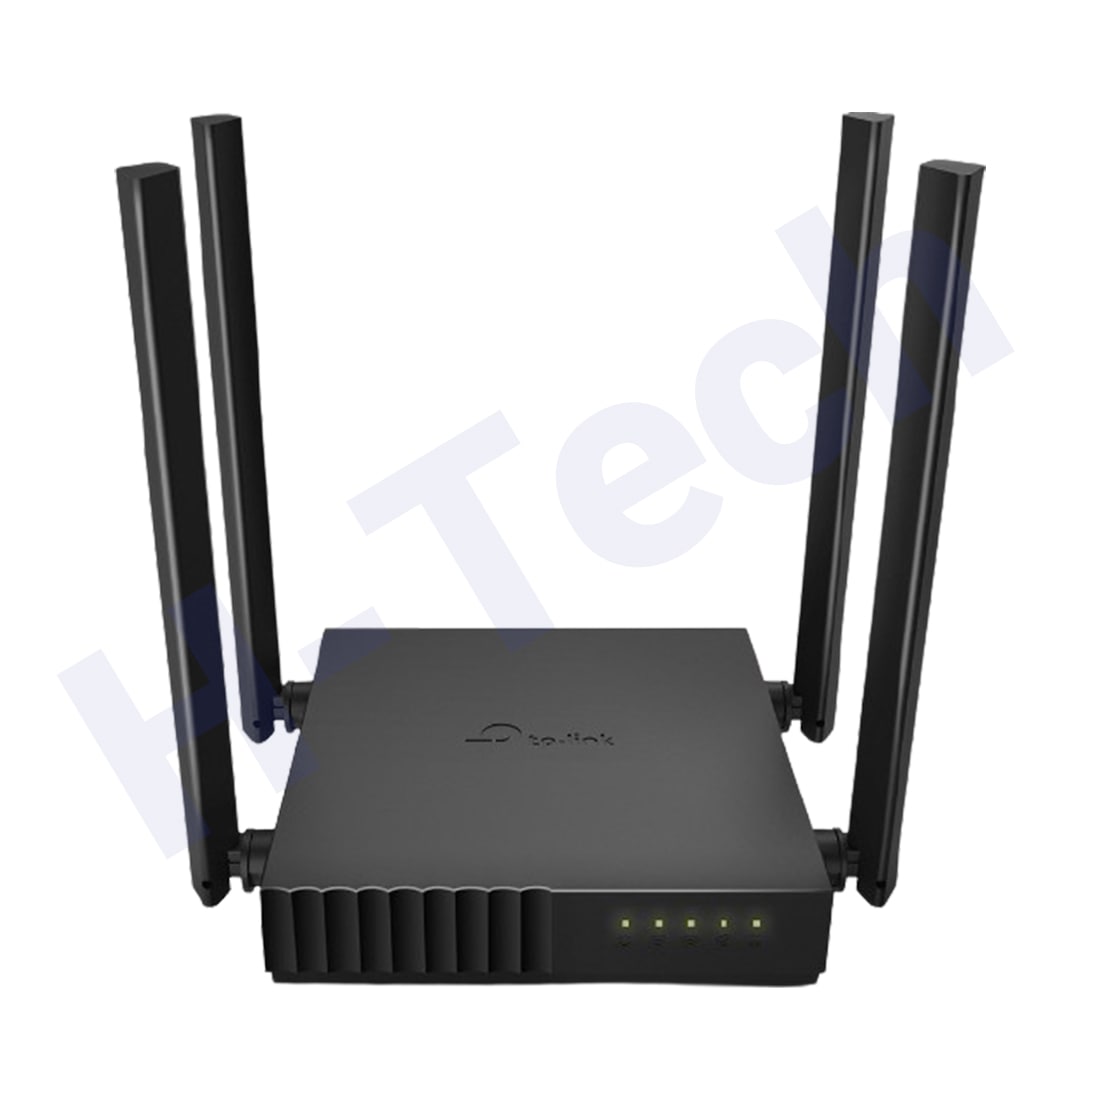 TP LINK ARCHER C54 Wireless Dual Router